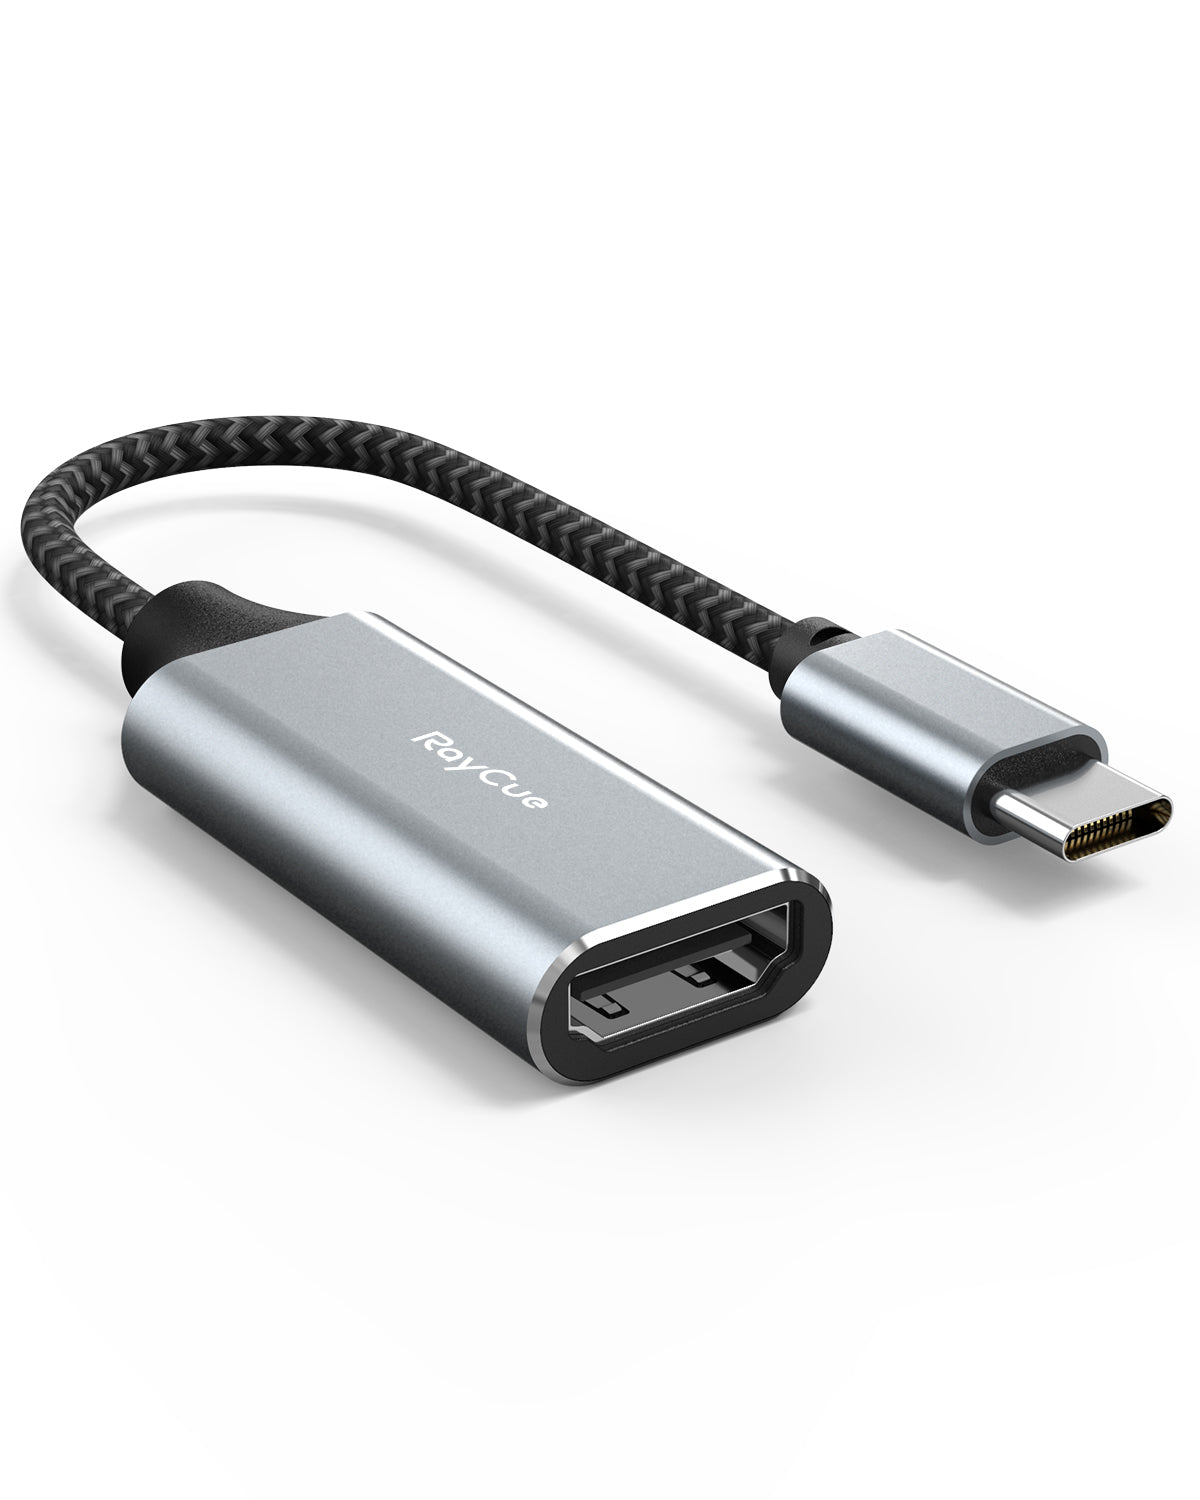 RayCue ExpandPro Uno H2 USB-C to 4K@30Hz HDMI Adapterw with Braided Cable